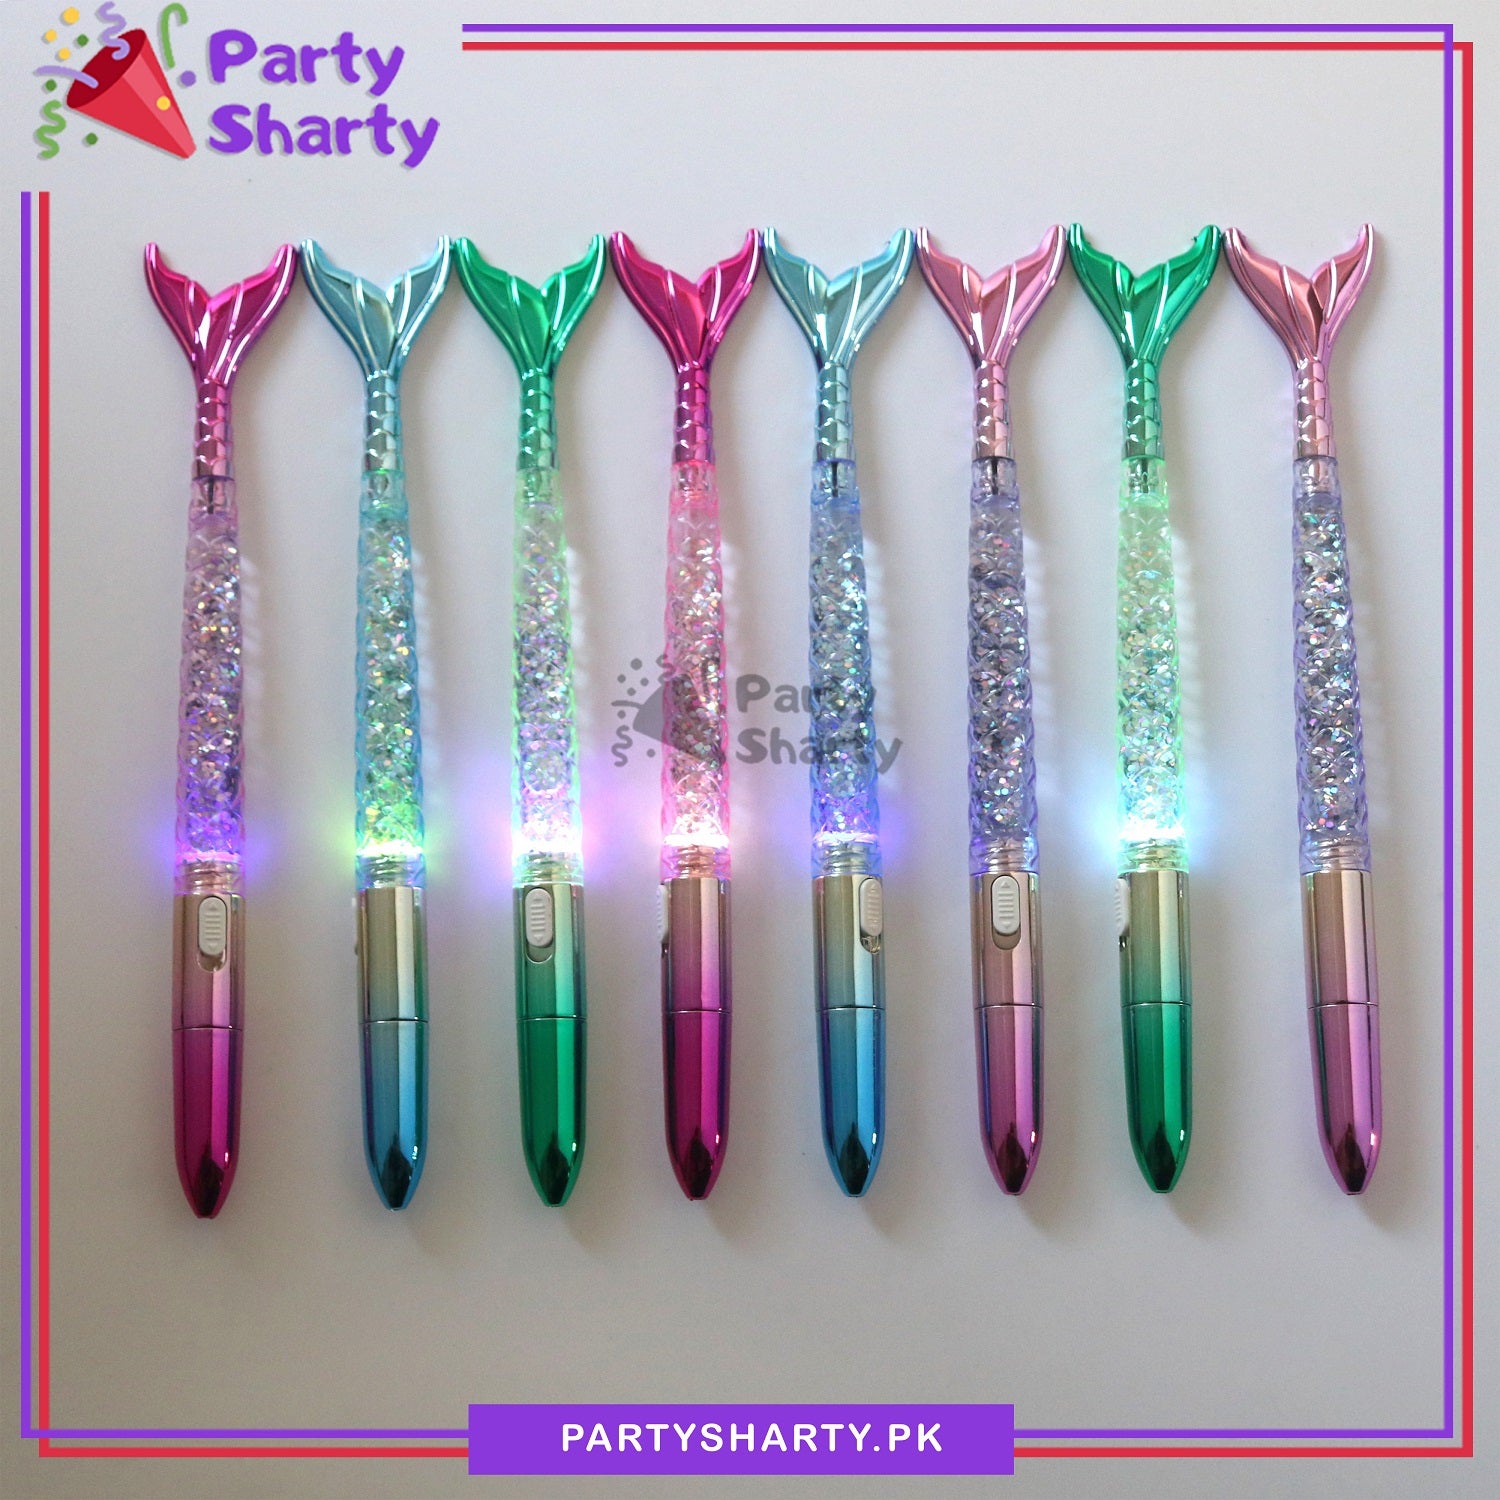 LED Mermaid Themed Gel Pens Filled with Water and Glitter For Kids / Stationery Sets / Birthday Return Gift Items